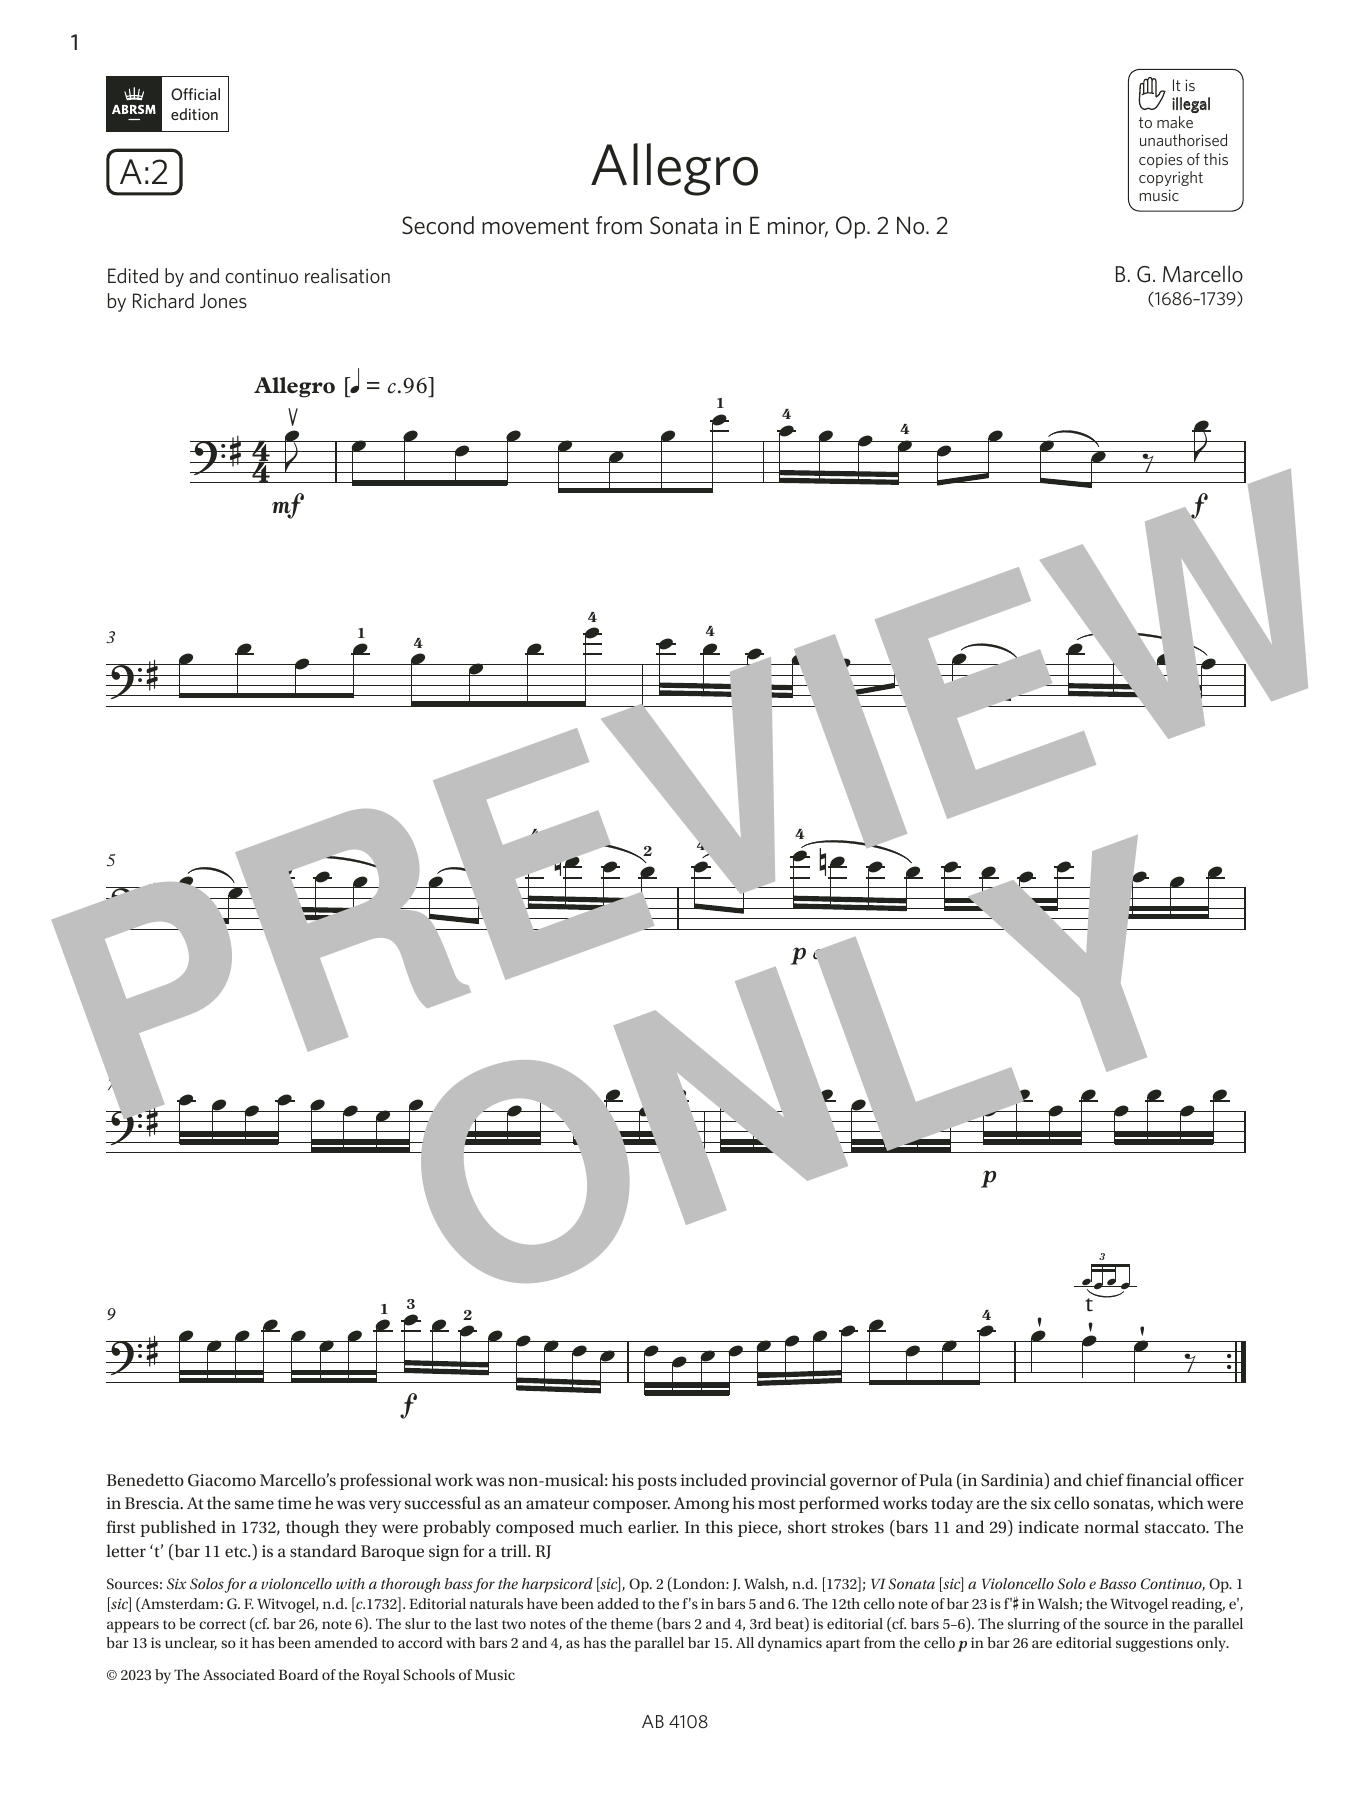 Download B. G. Marcello Allegro (Grade 5, A2, from the ABRSM Ce Sheet Music